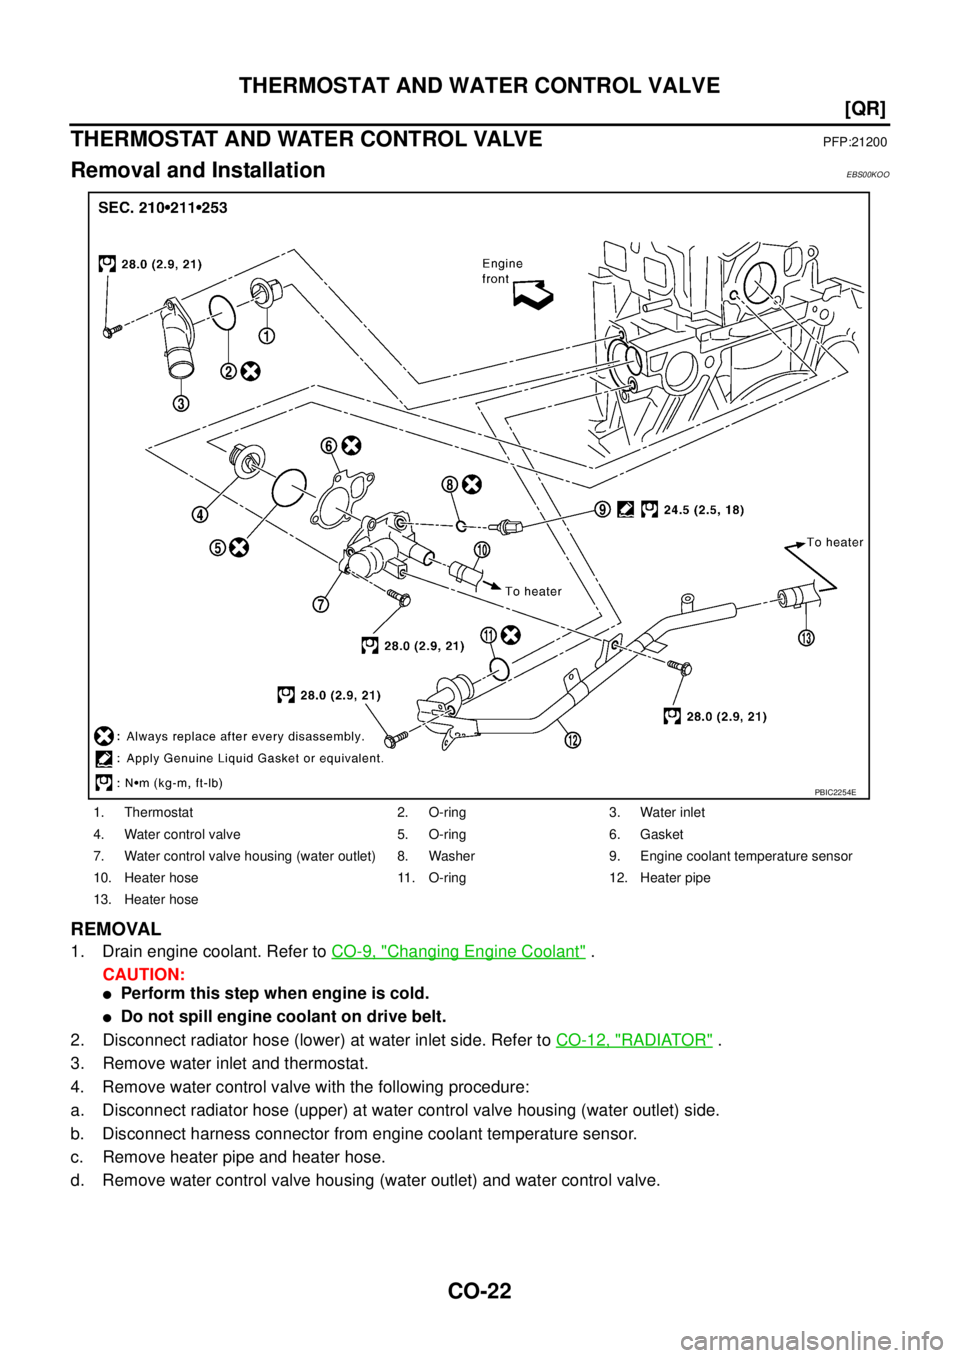 NISSAN X-TRAIL 2003  Service Owners Manual CO-22
[QR]
THERMOSTAT AND WATER CONTROL VALVE
 
THERMOSTAT AND WATER CONTROL VALVEPFP:21200
Removal and InstallationEBS00KOO
REMOVAL
1. Drain engine coolant. Refer to CO-9, "Changing Engine Coolant" .